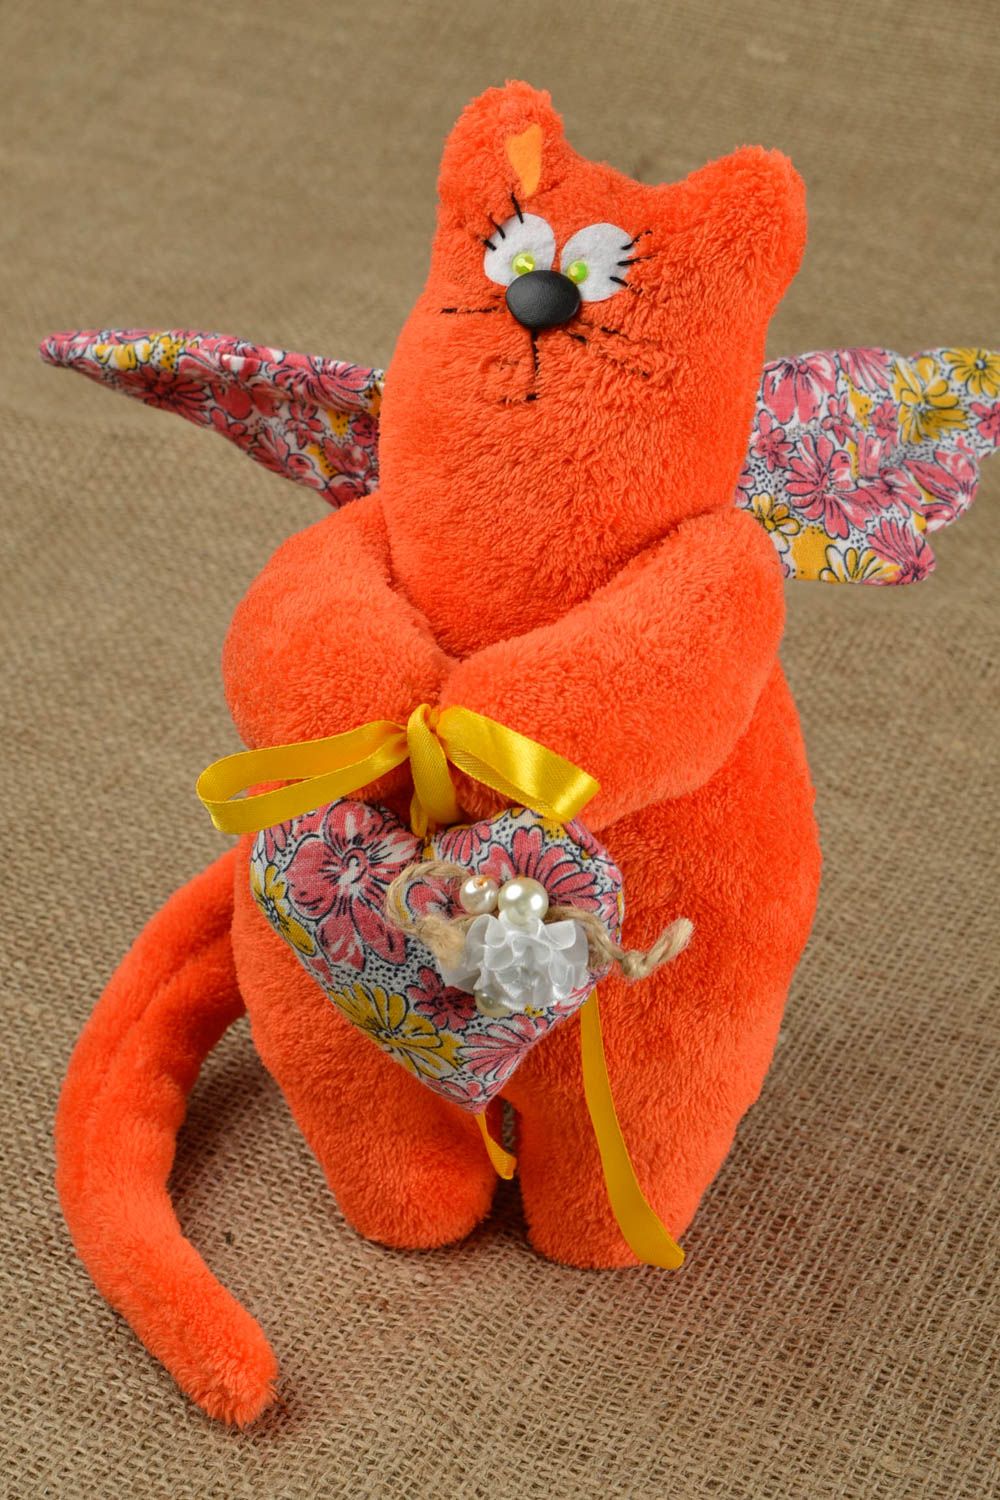 Beautiful handmade soft toy best toys for kids interior decorating ideas photo 1